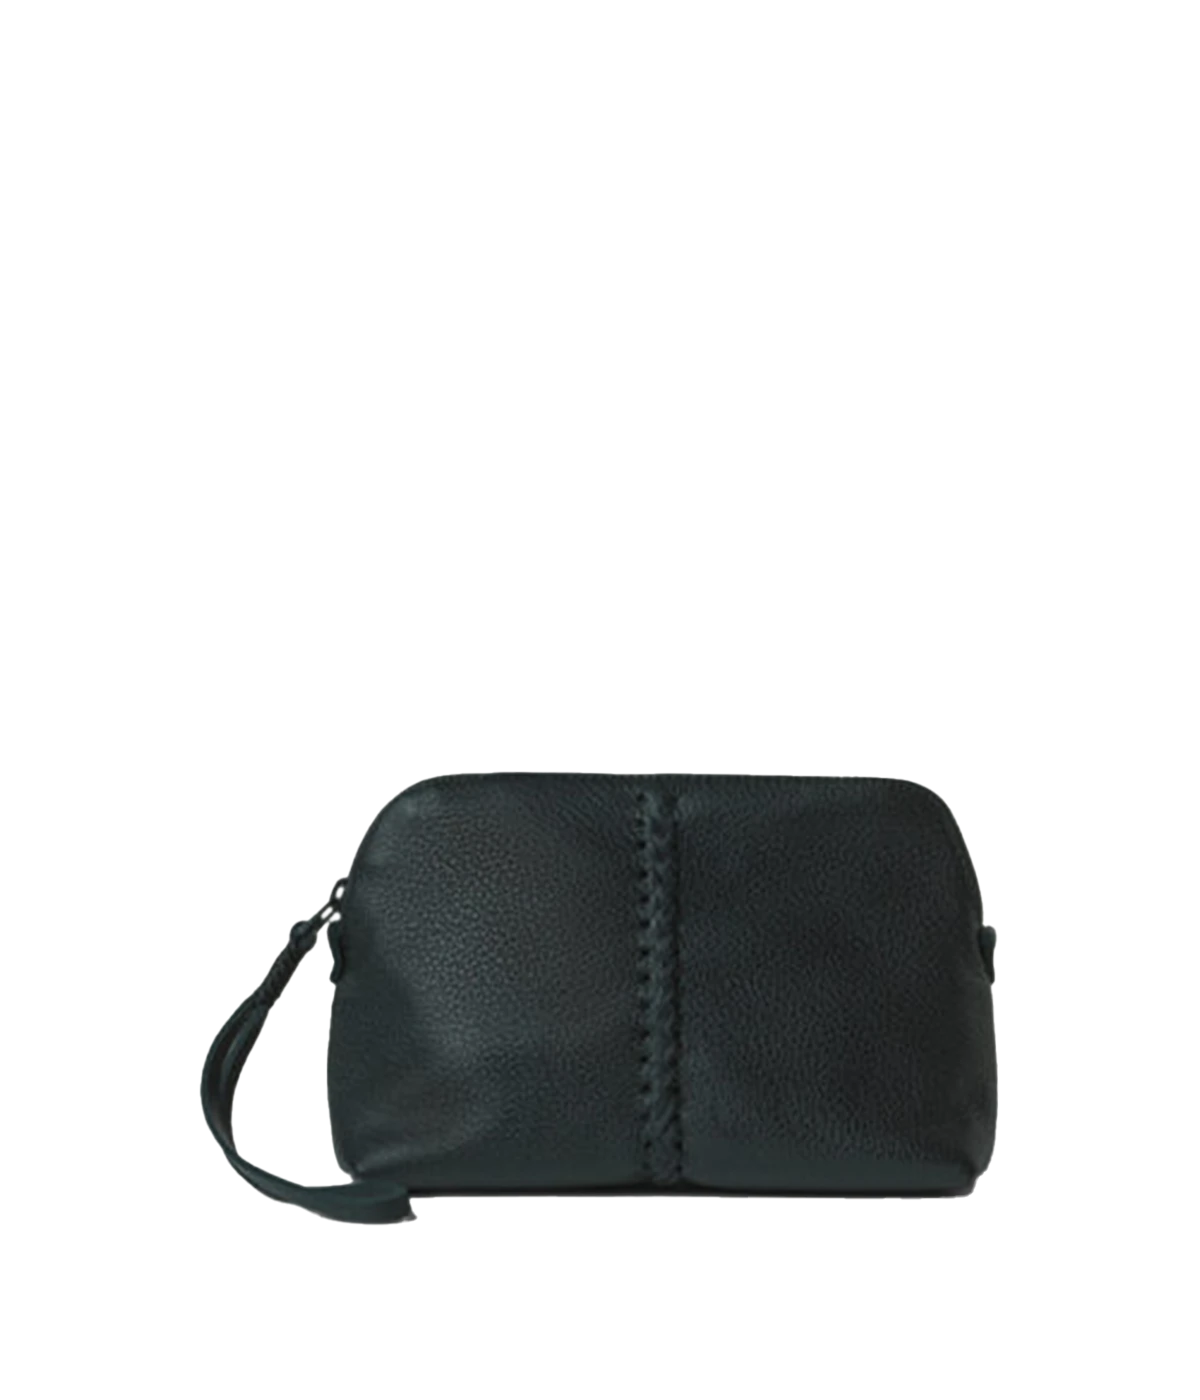 An essential vanity case in black featuring 100% leather,  signature leather handstitching, wrist strap, full lining. Makeup bag, travel essential, everyday extra bag, Made in Greece, luxury leather, everyday work bag, mum bag throw on and go.